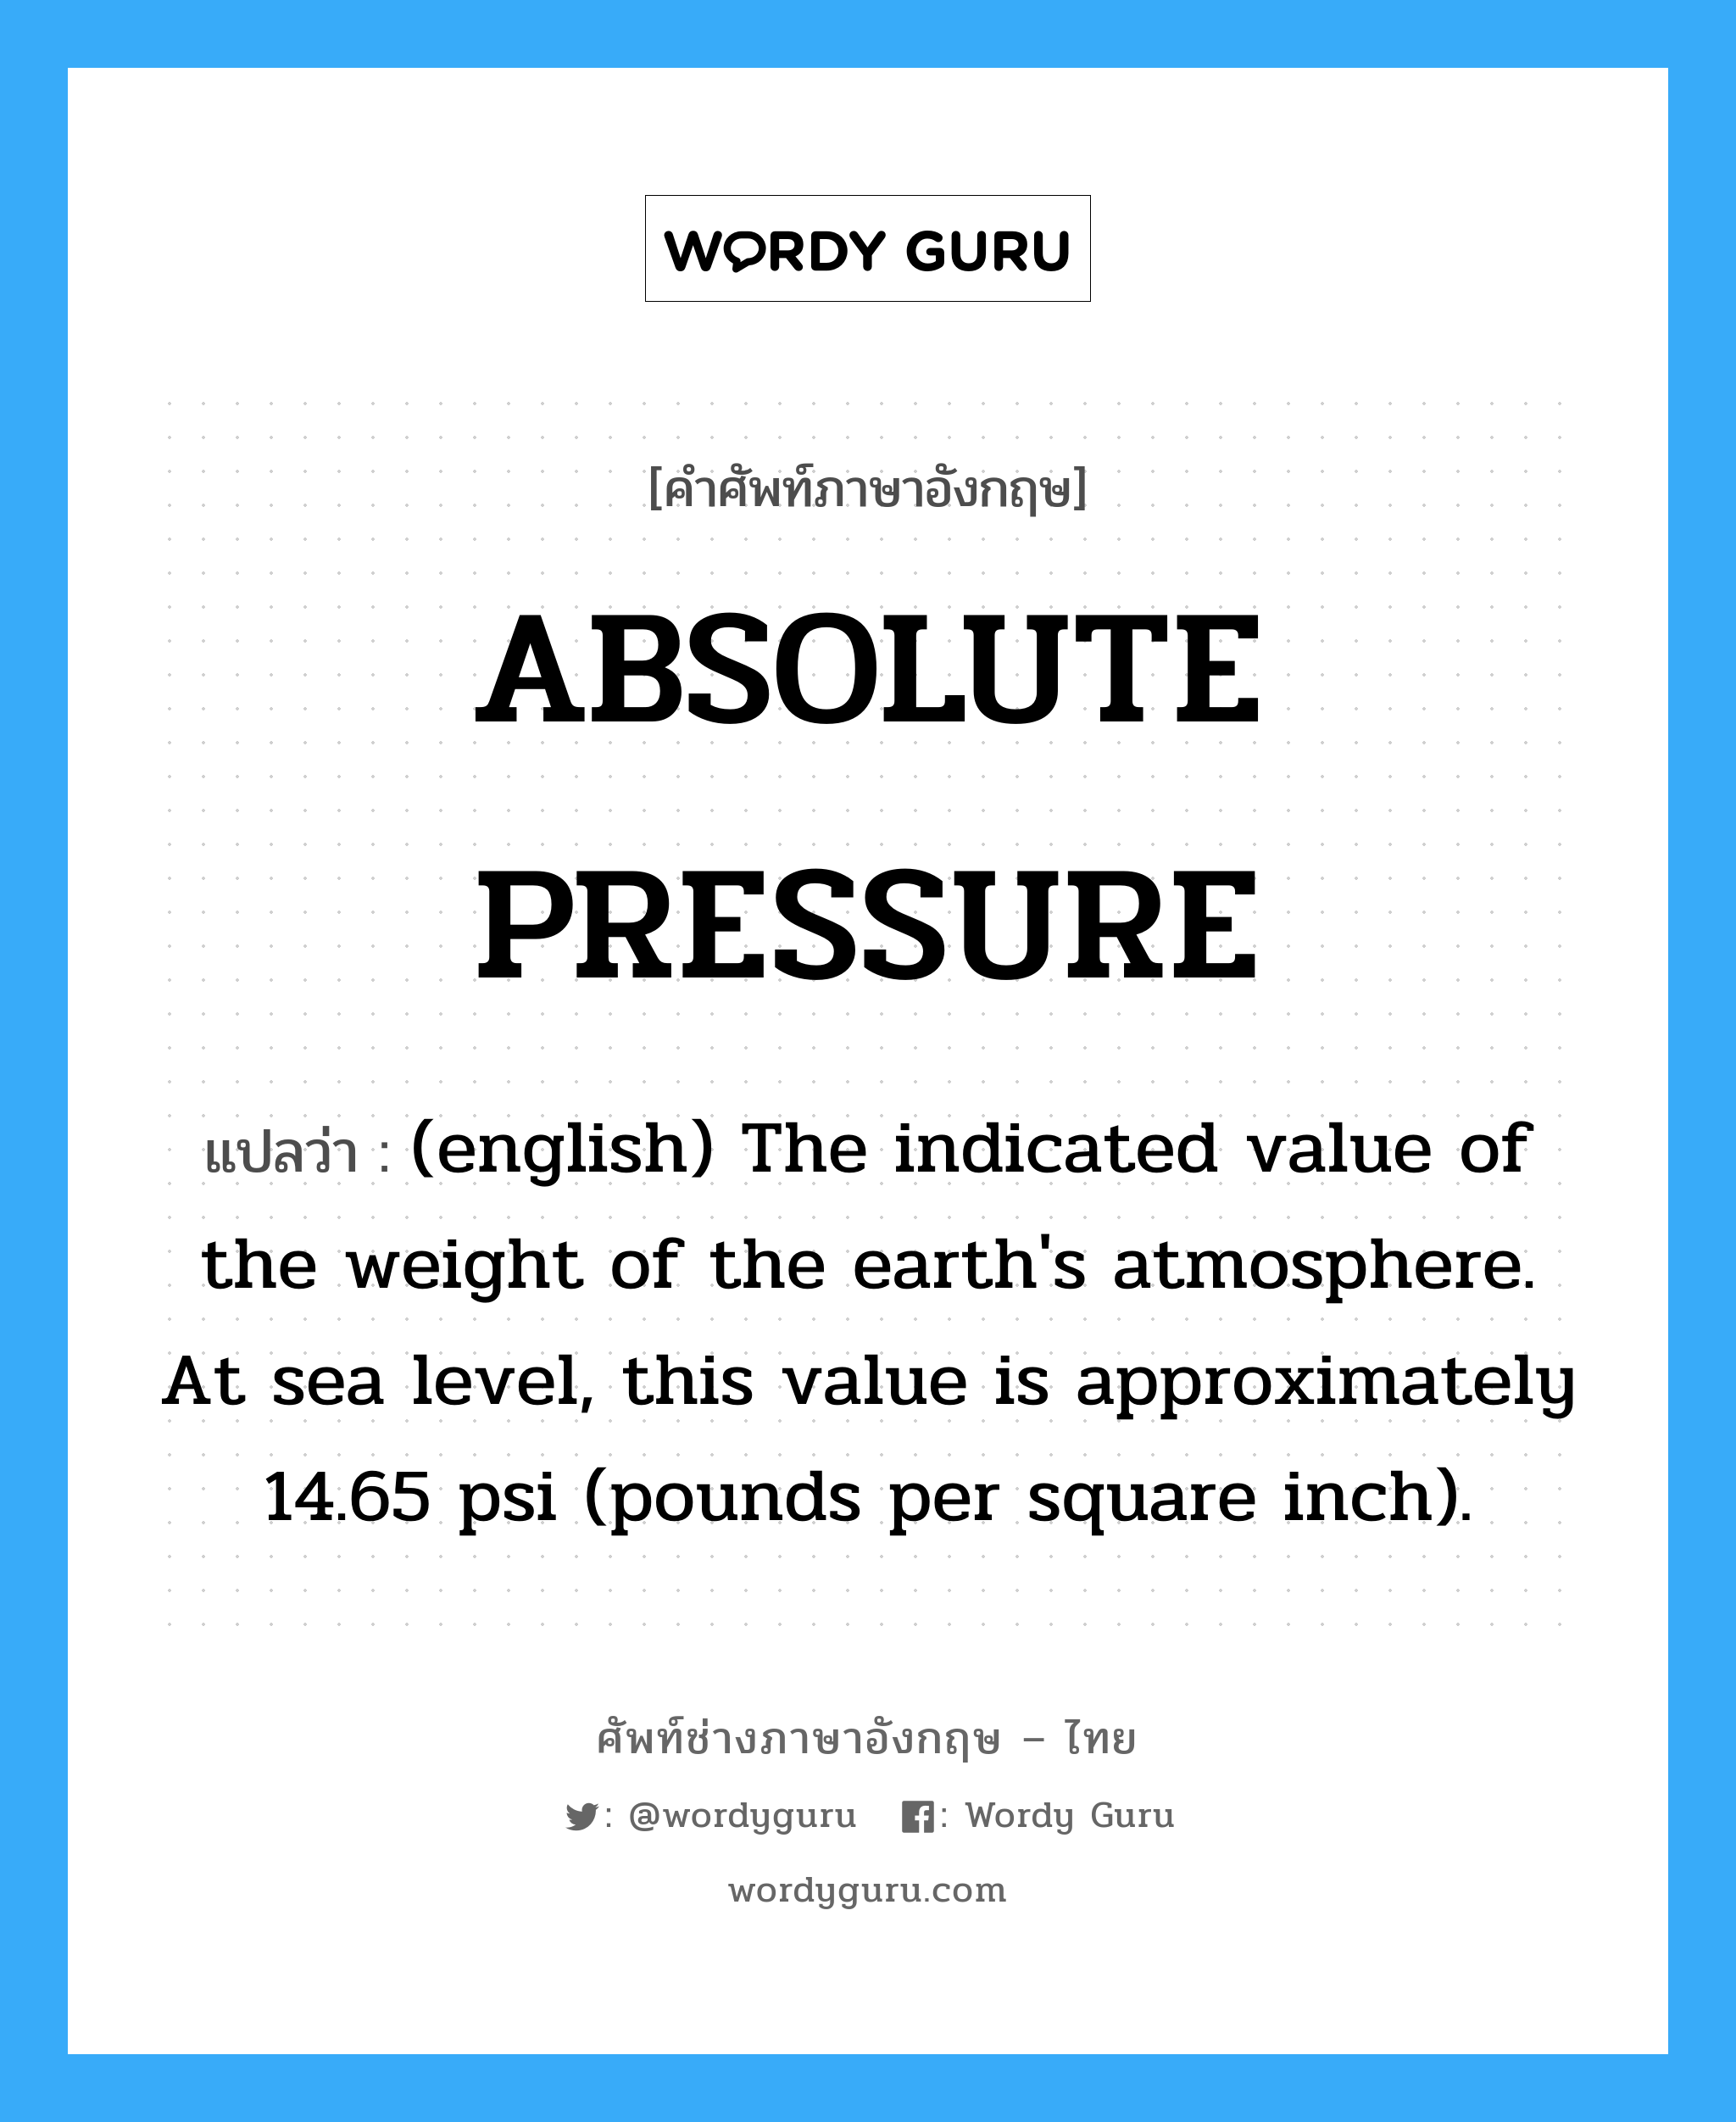 (english) The indicated value of the weight of the earth's atmosphere. At sea level, this value is approximately 14.65 psi (pounds per square inch). ภาษาอังกฤษ?, คำศัพท์ช่างภาษาอังกฤษ - ไทย (english) The indicated value of the weight of the earth's atmosphere. At sea level, this value is approximately 14.65 psi (pounds per square inch). คำศัพท์ภาษาอังกฤษ (english) The indicated value of the weight of the earth's atmosphere. At sea level, this value is approximately 14.65 psi (pounds per square inch). แปลว่า ABSOLUTE PRESSURE